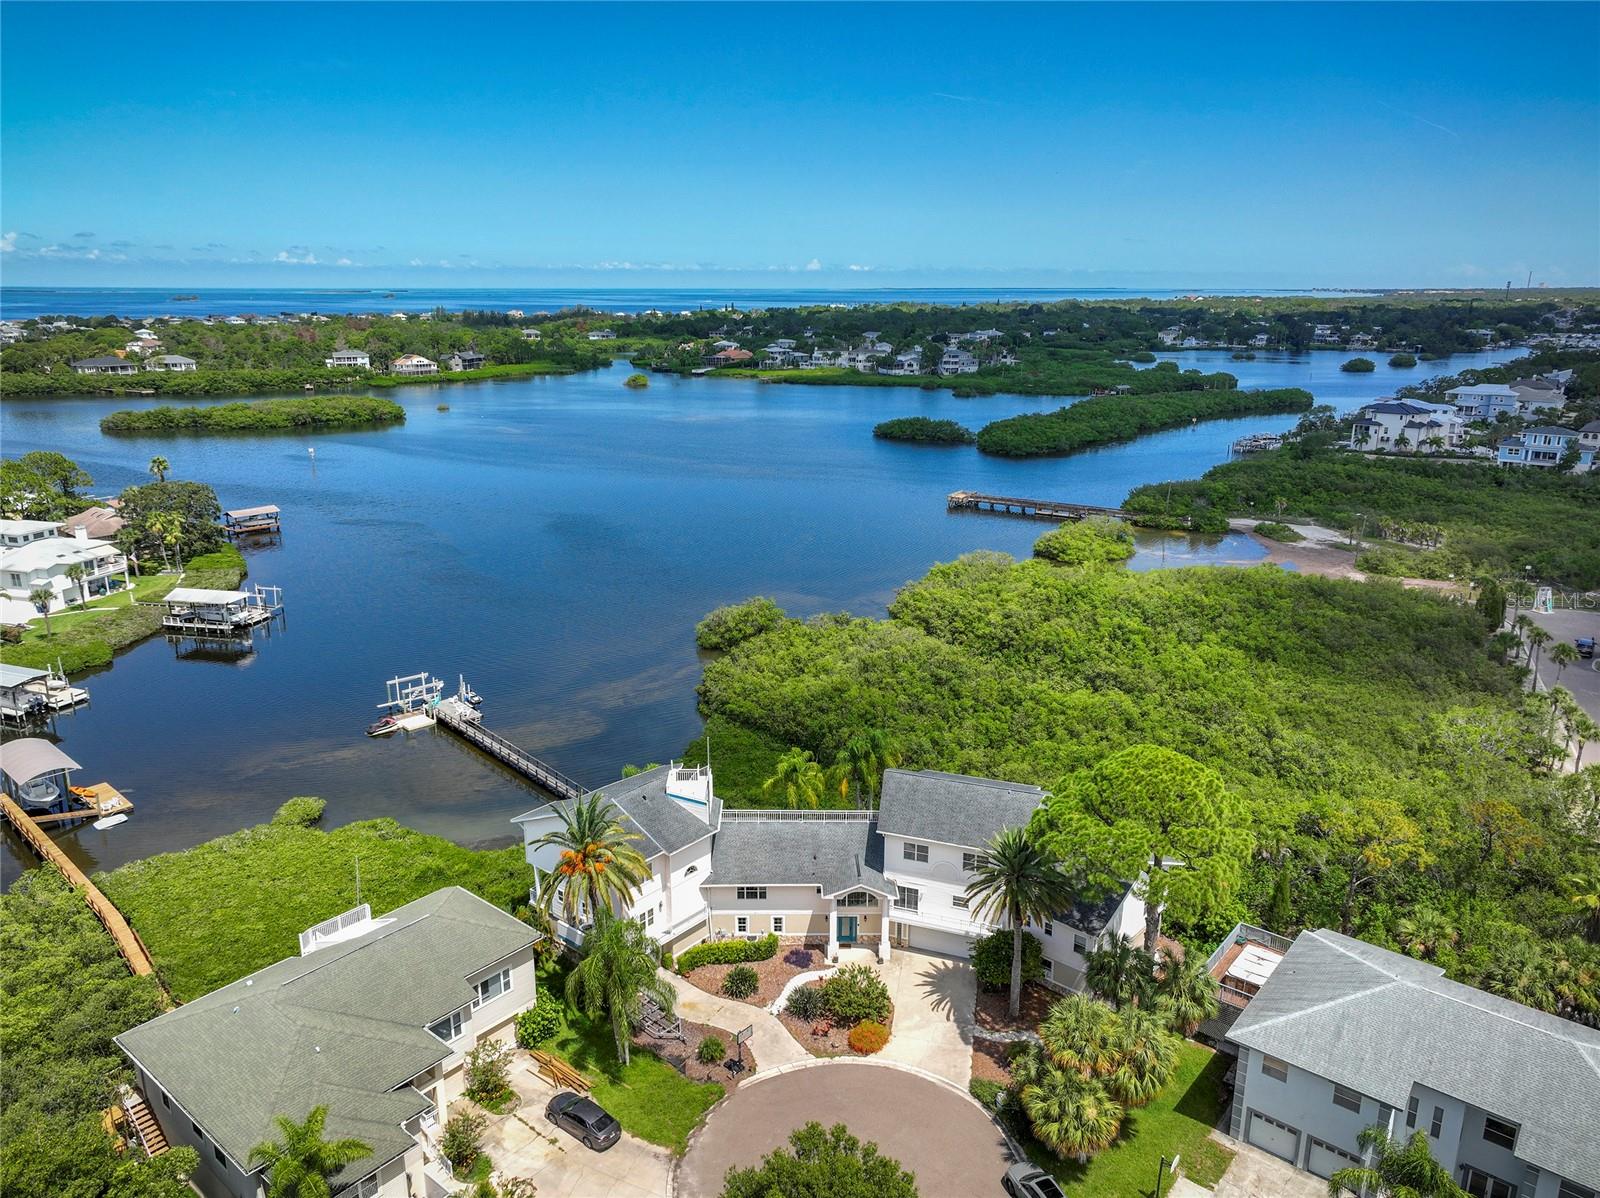 This is a beautiful 6 bedroom Home with over 6000 SF on the water with Pool, Spa, Dock and Boat Lift